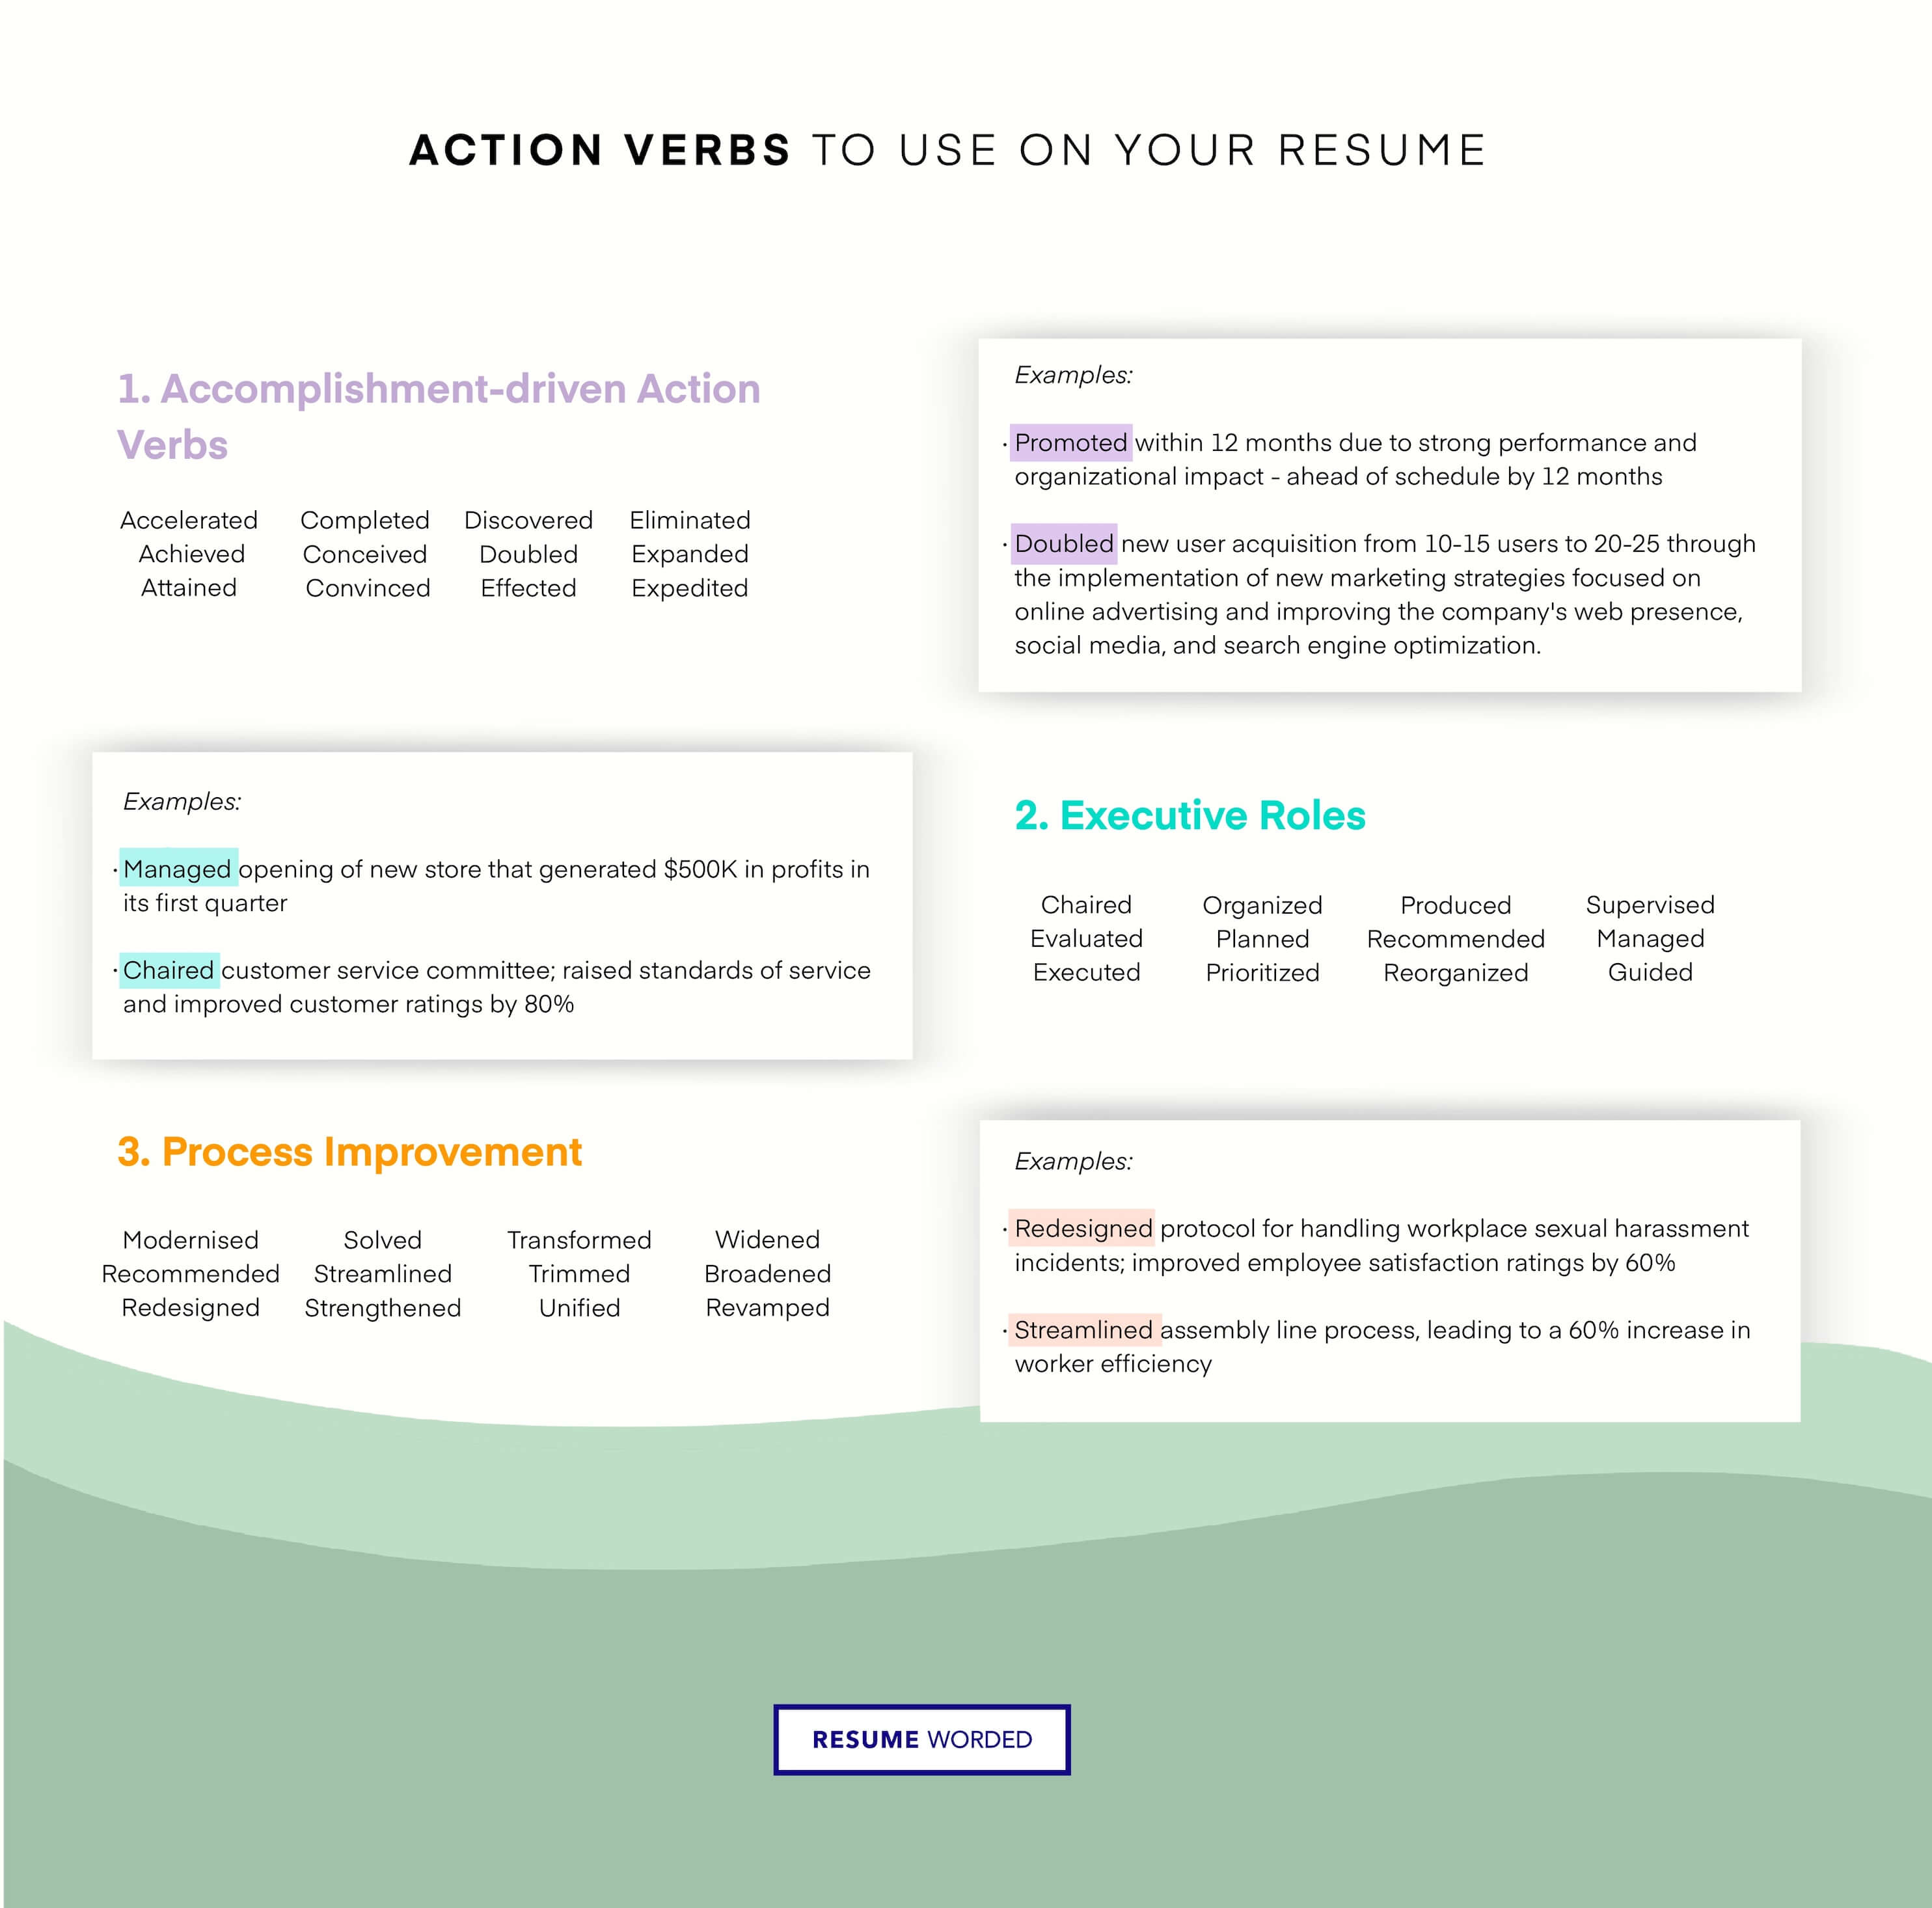 Use strong action verbs to mention your accomplishments. - Sales Director Resume